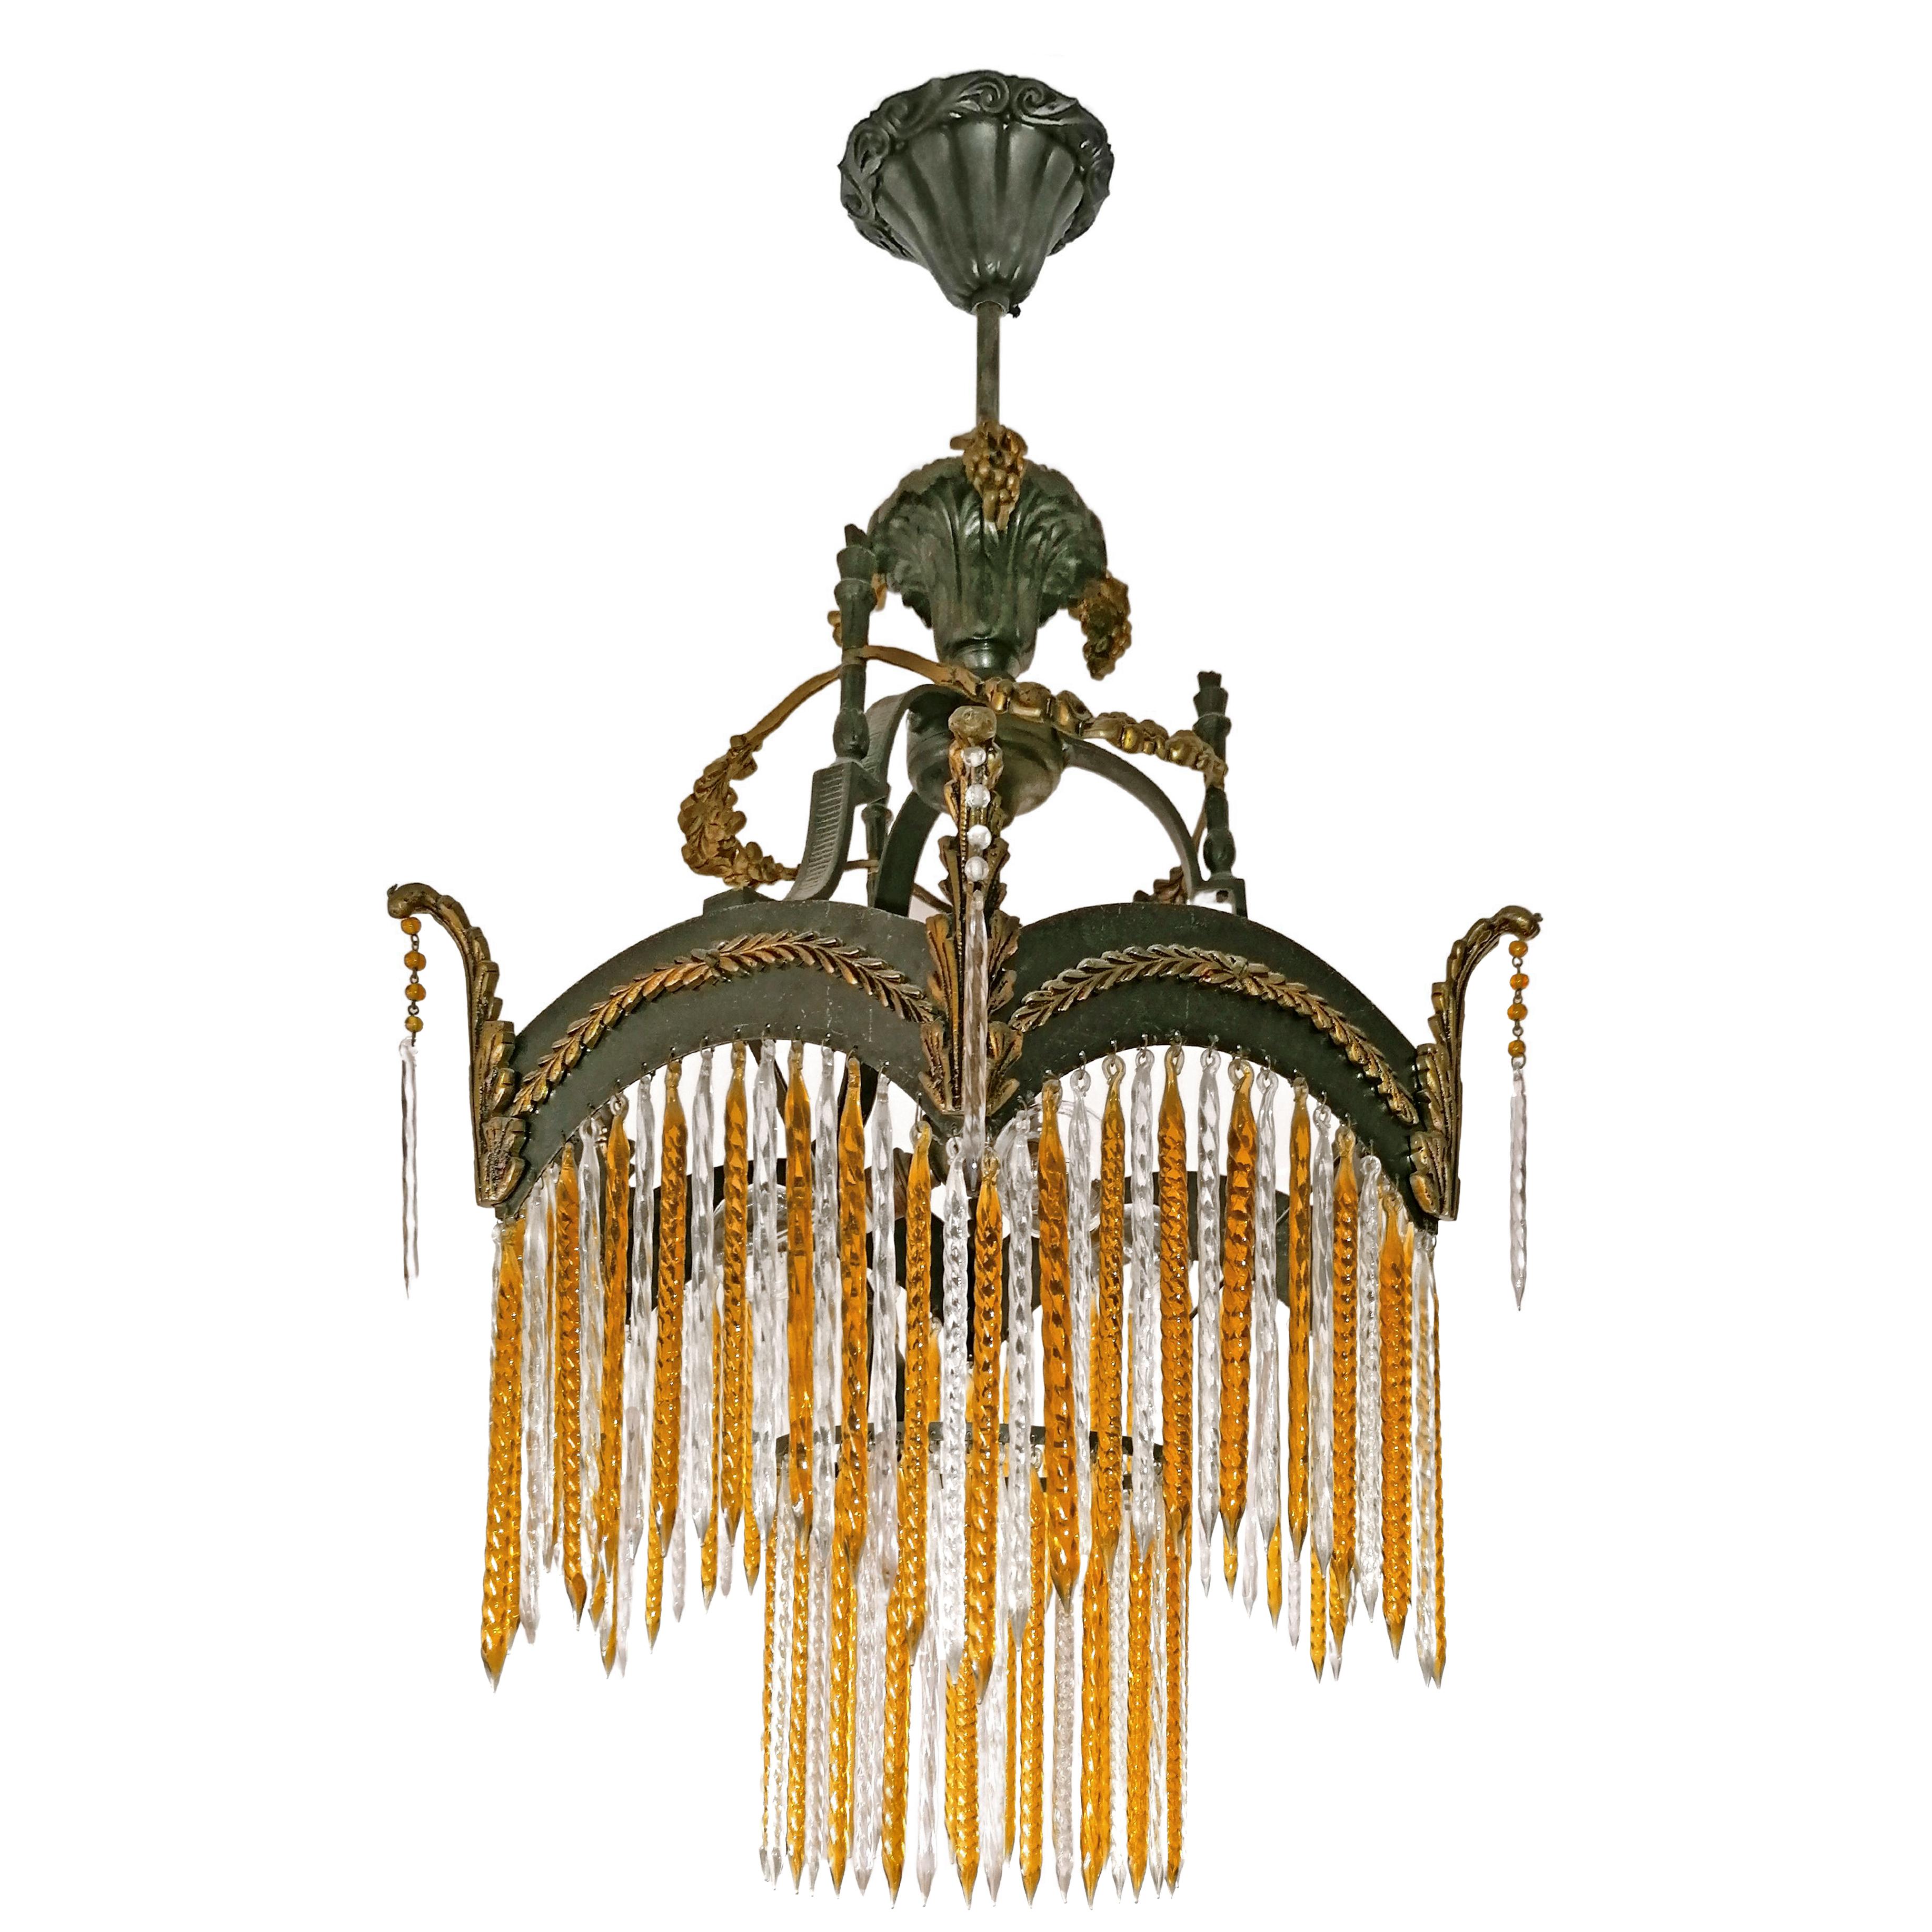 Pair French Art Deco & Art Nouveau Gilt Chandelier w Amber Crystal Glass Fringe In Good Condition For Sale In Coimbra, PT